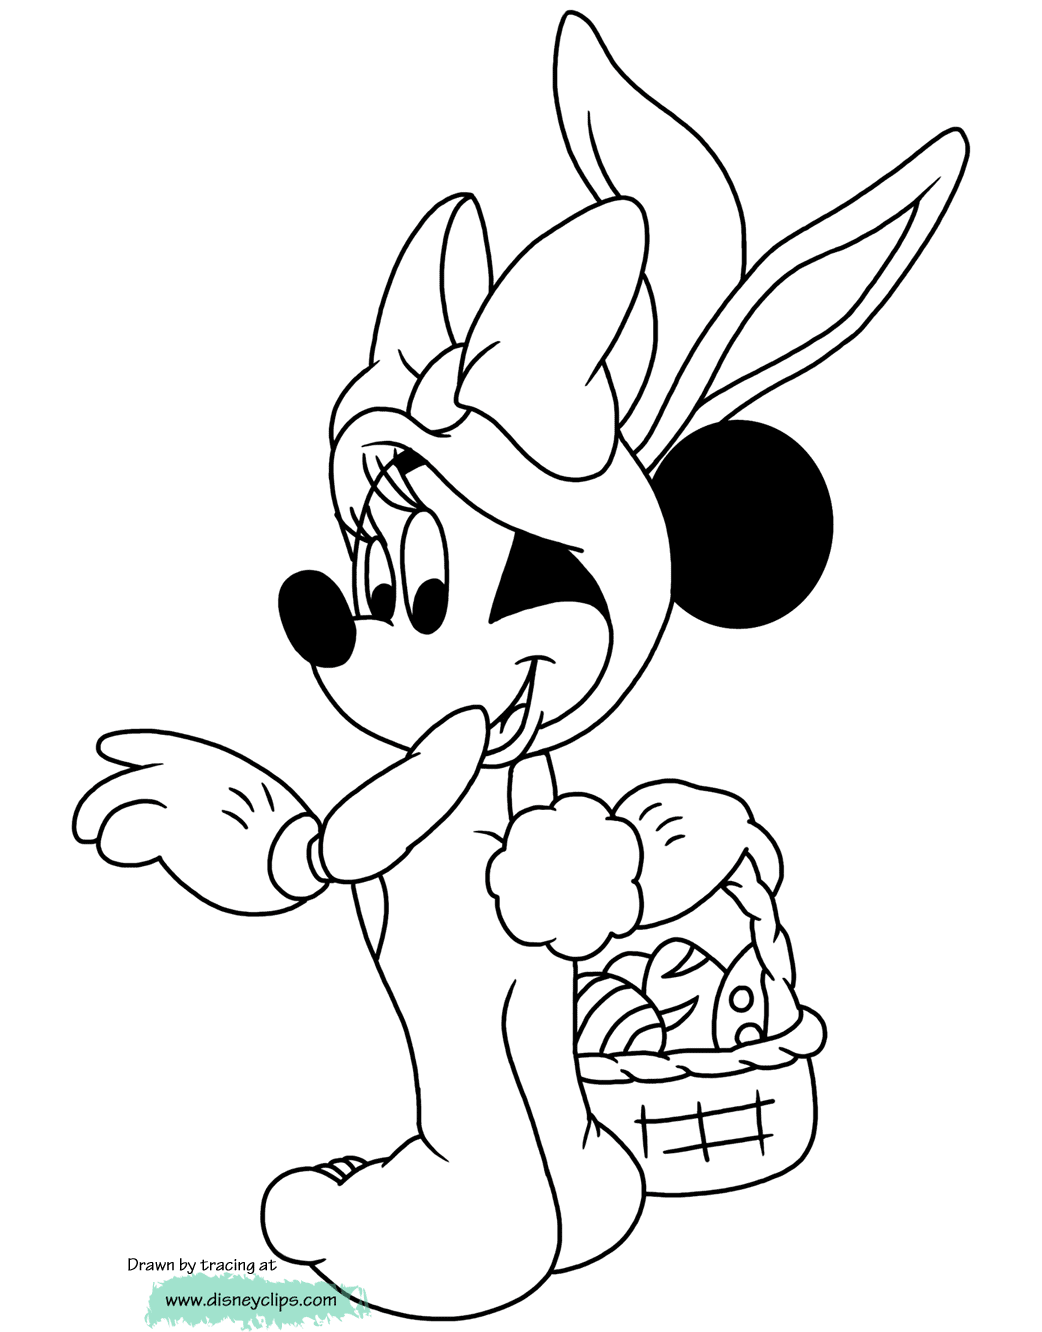 Download Printable Disney Easter Coloring Pages (2) | Disneyclips.com